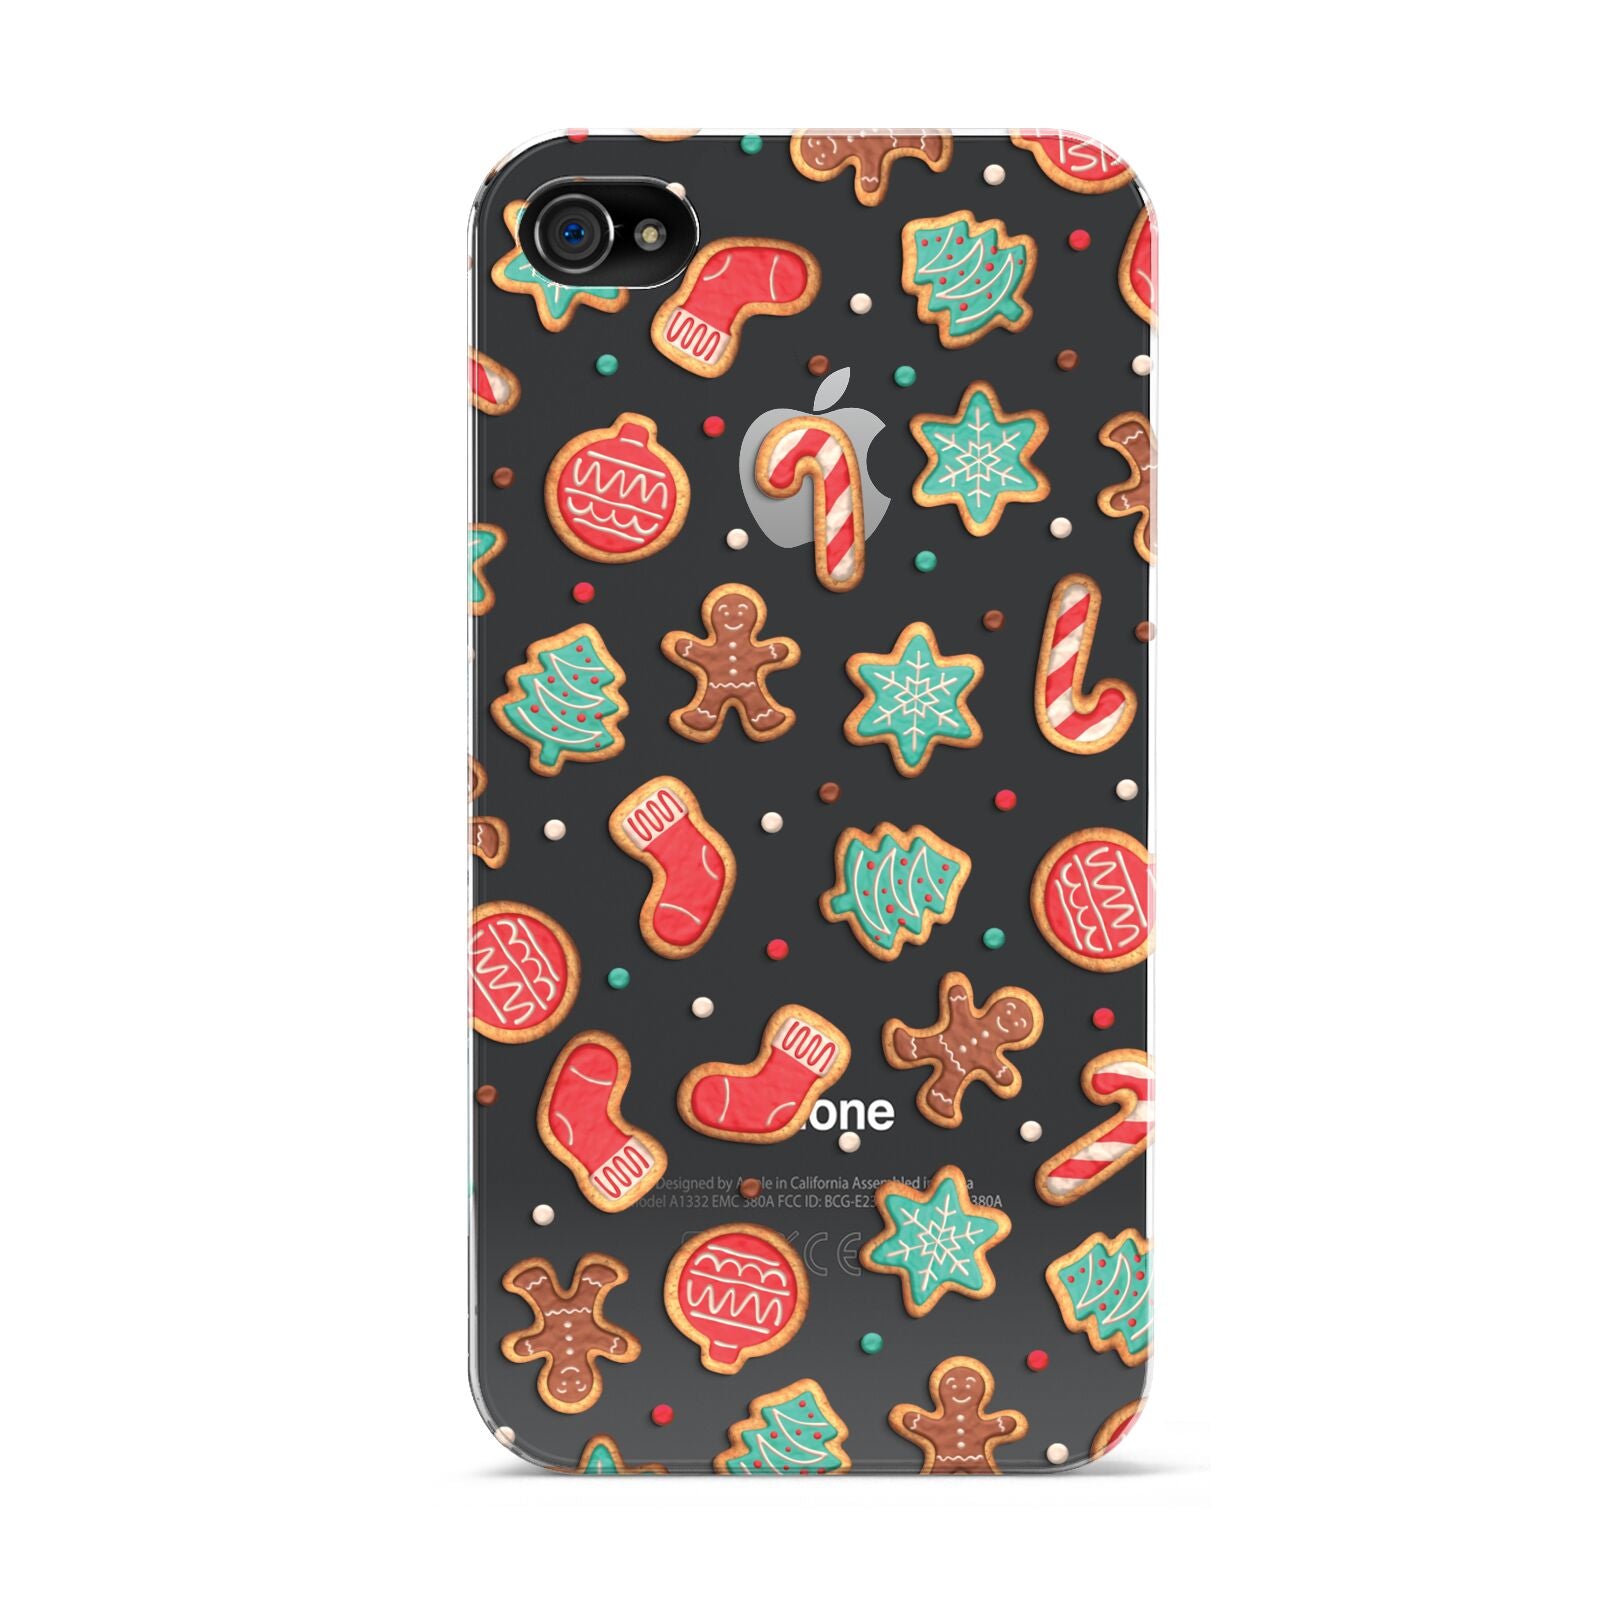 Gingerbread Christmas Apple iPhone 4s Case